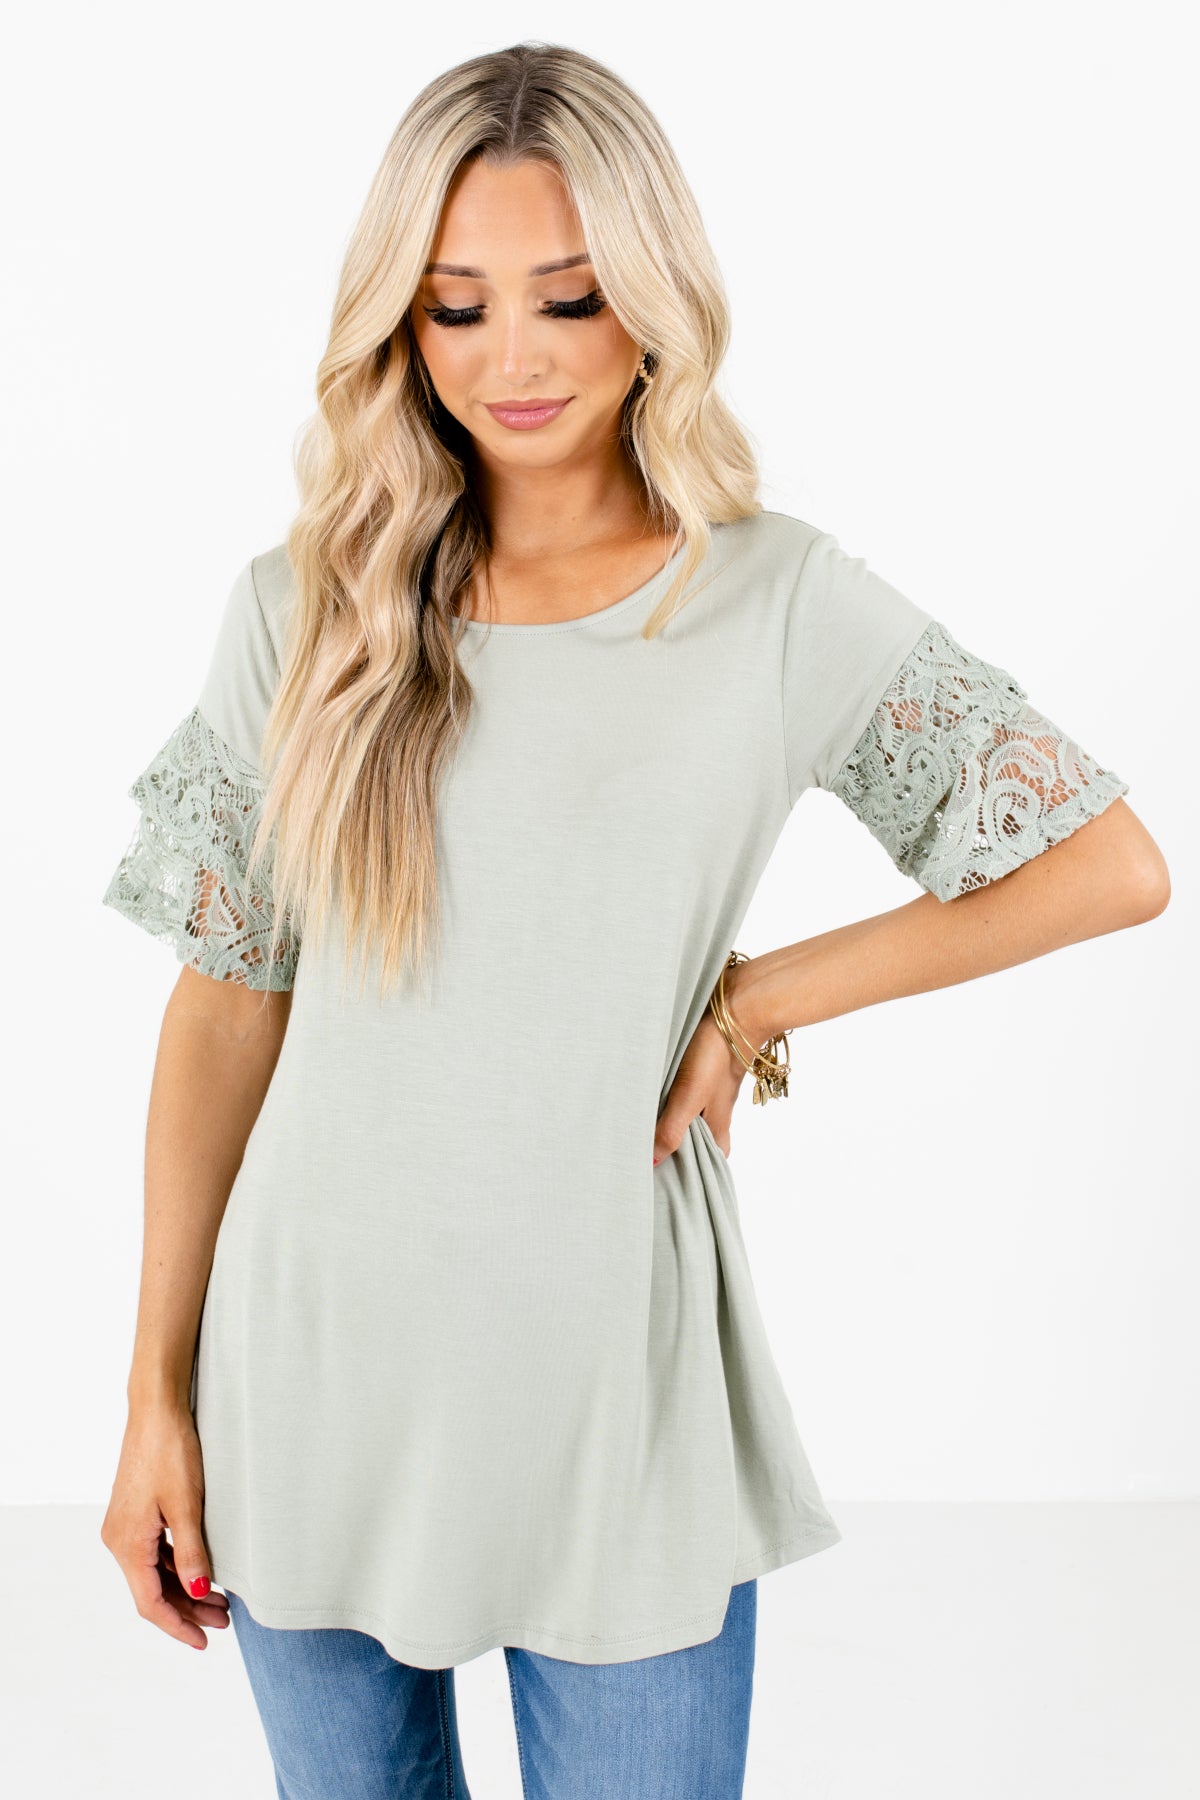 Lace Sleeve Top in Light Sage Green For Women